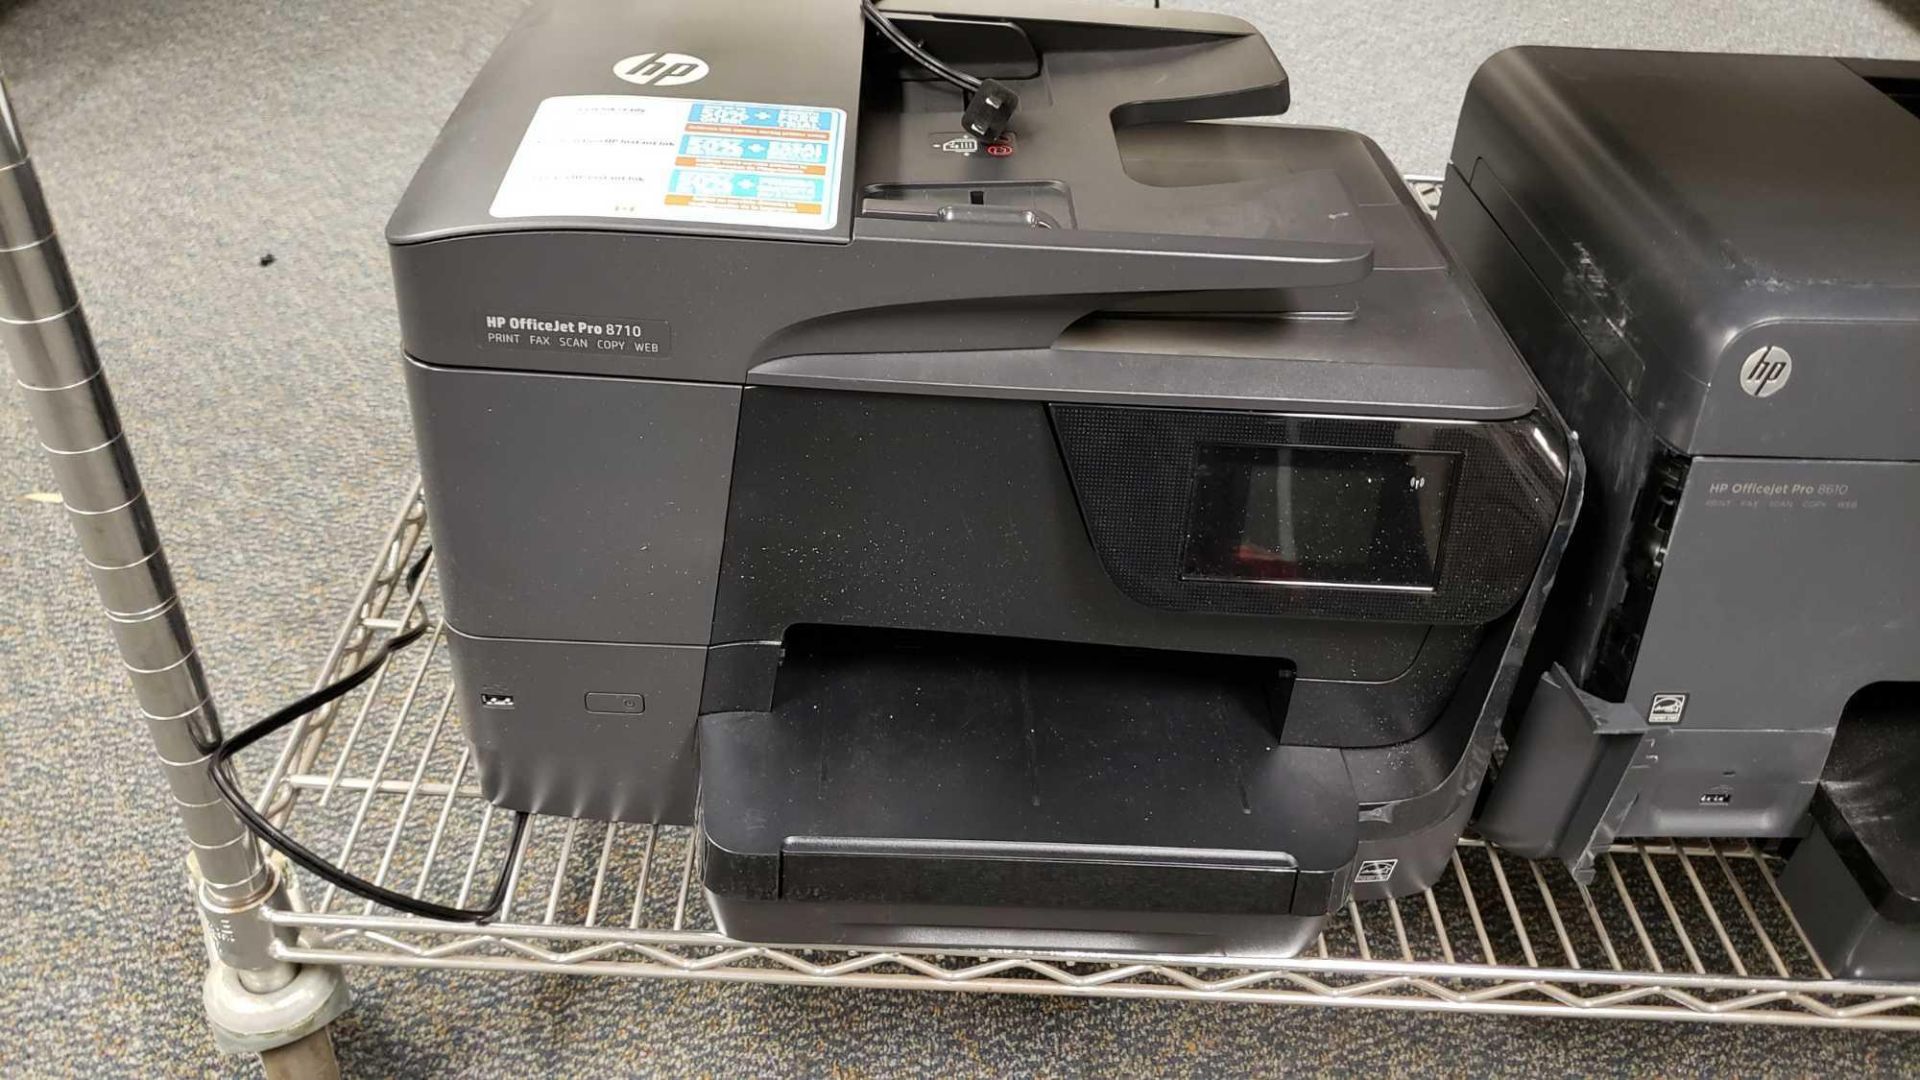 Lot of (3) HP Printers to include (2) HP Officejet Pro 8710 and (1) HP Officejet Pro 8610 - Image 4 of 4